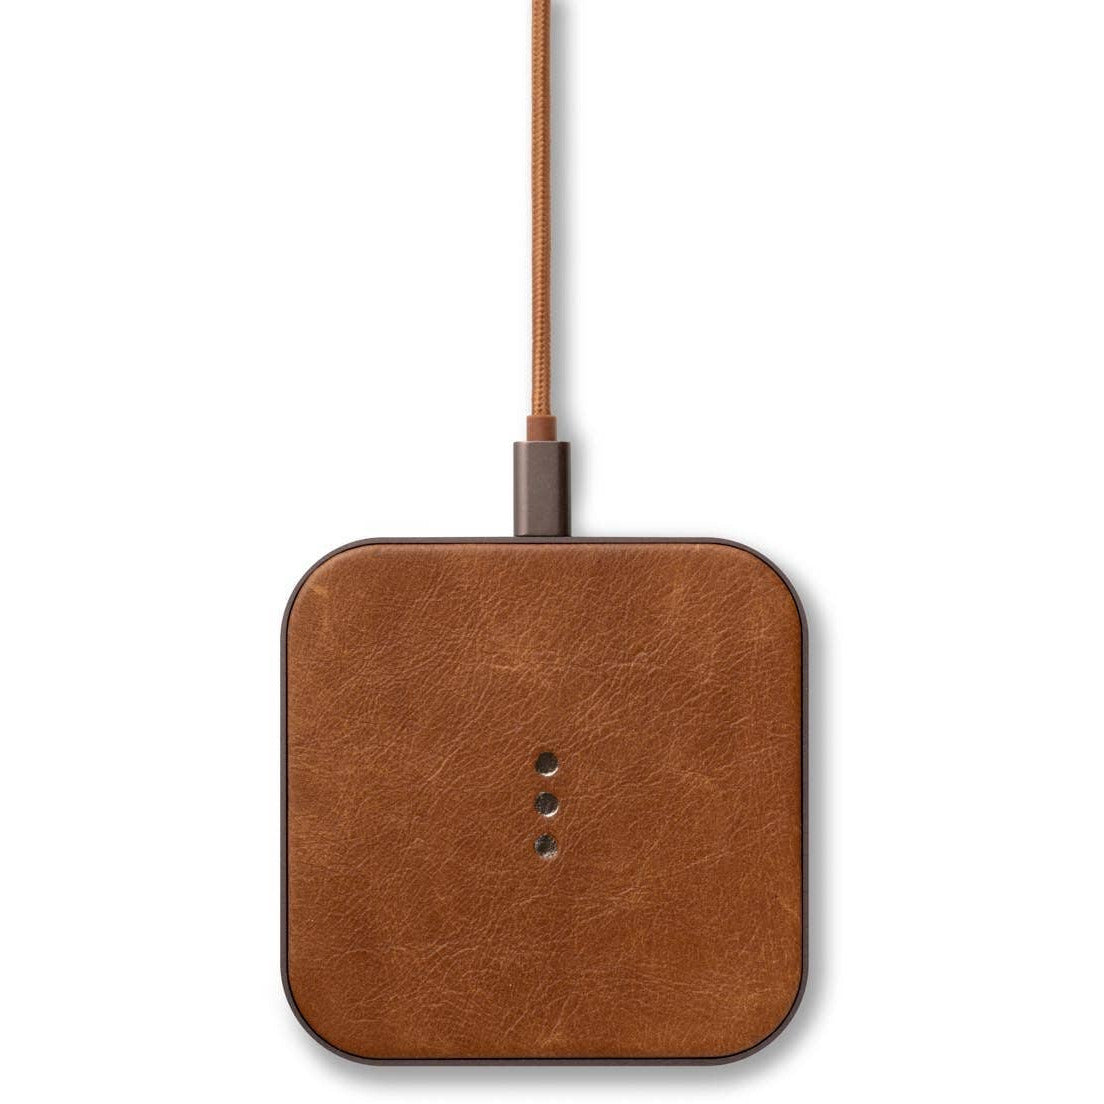 CATCH:1 - Classically Simple Wireless Charger